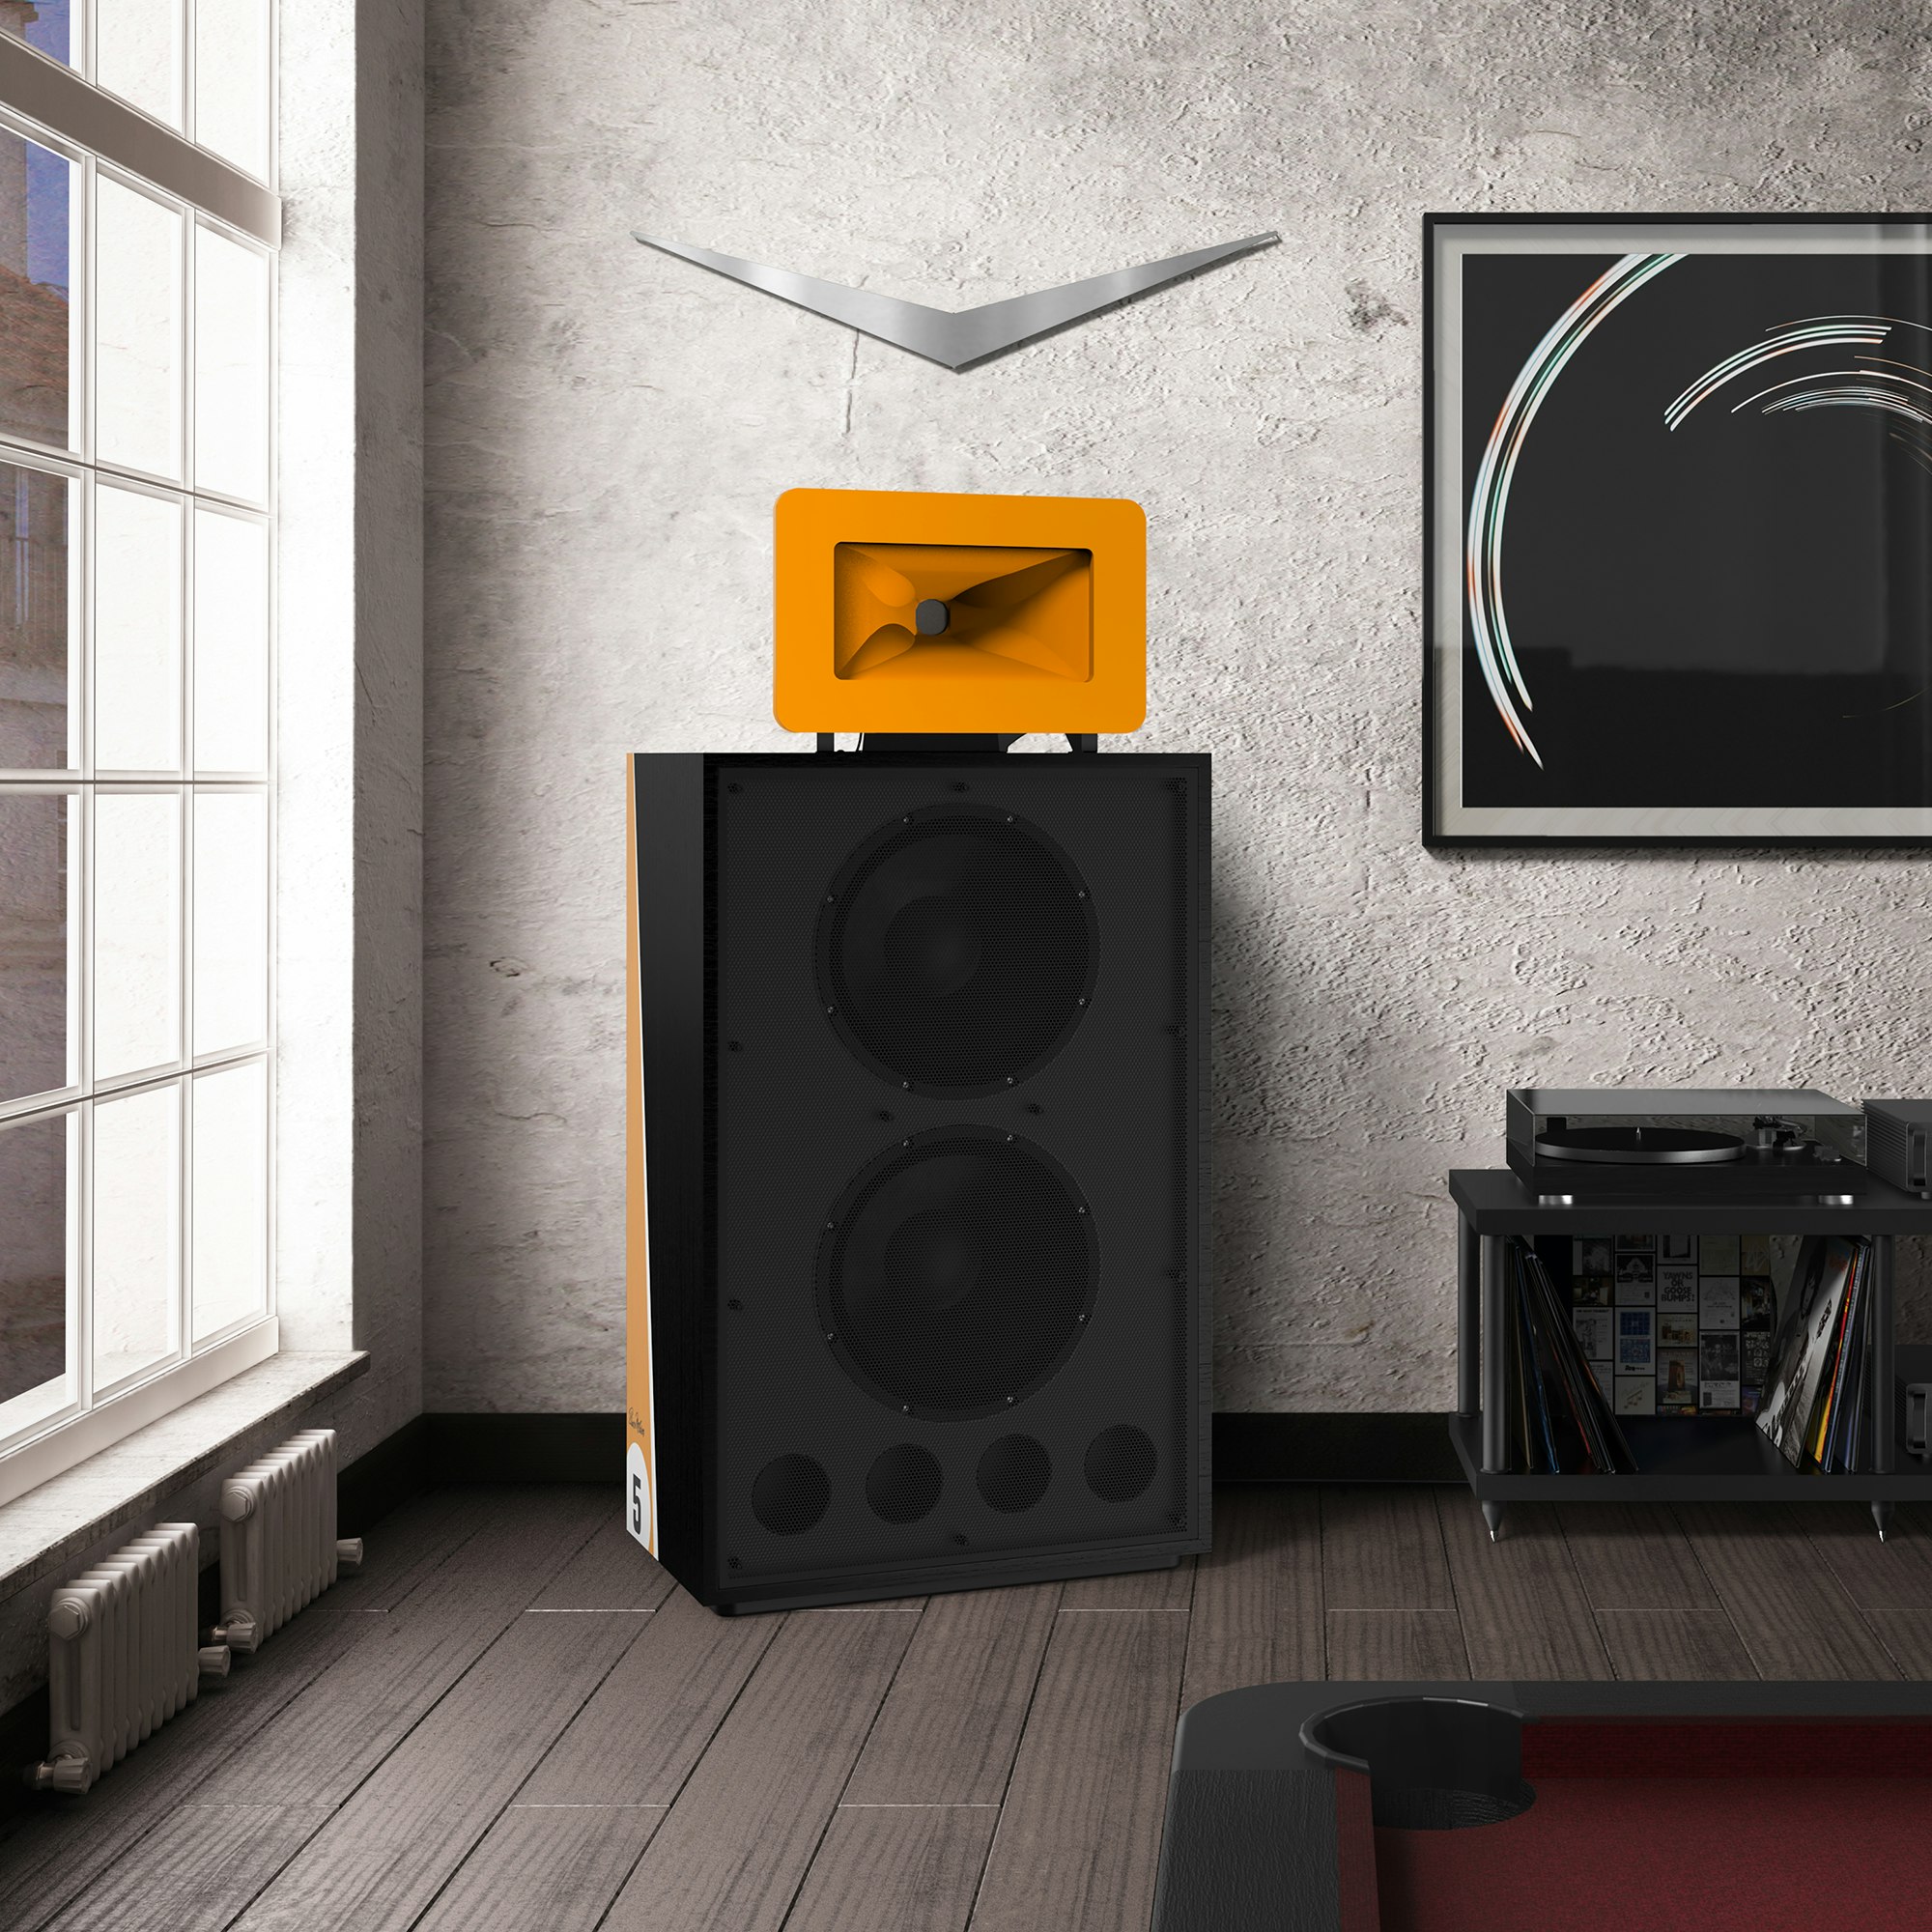 McL-905-In-Upscale-Condo-Near-Record-Player_2000x2000.png